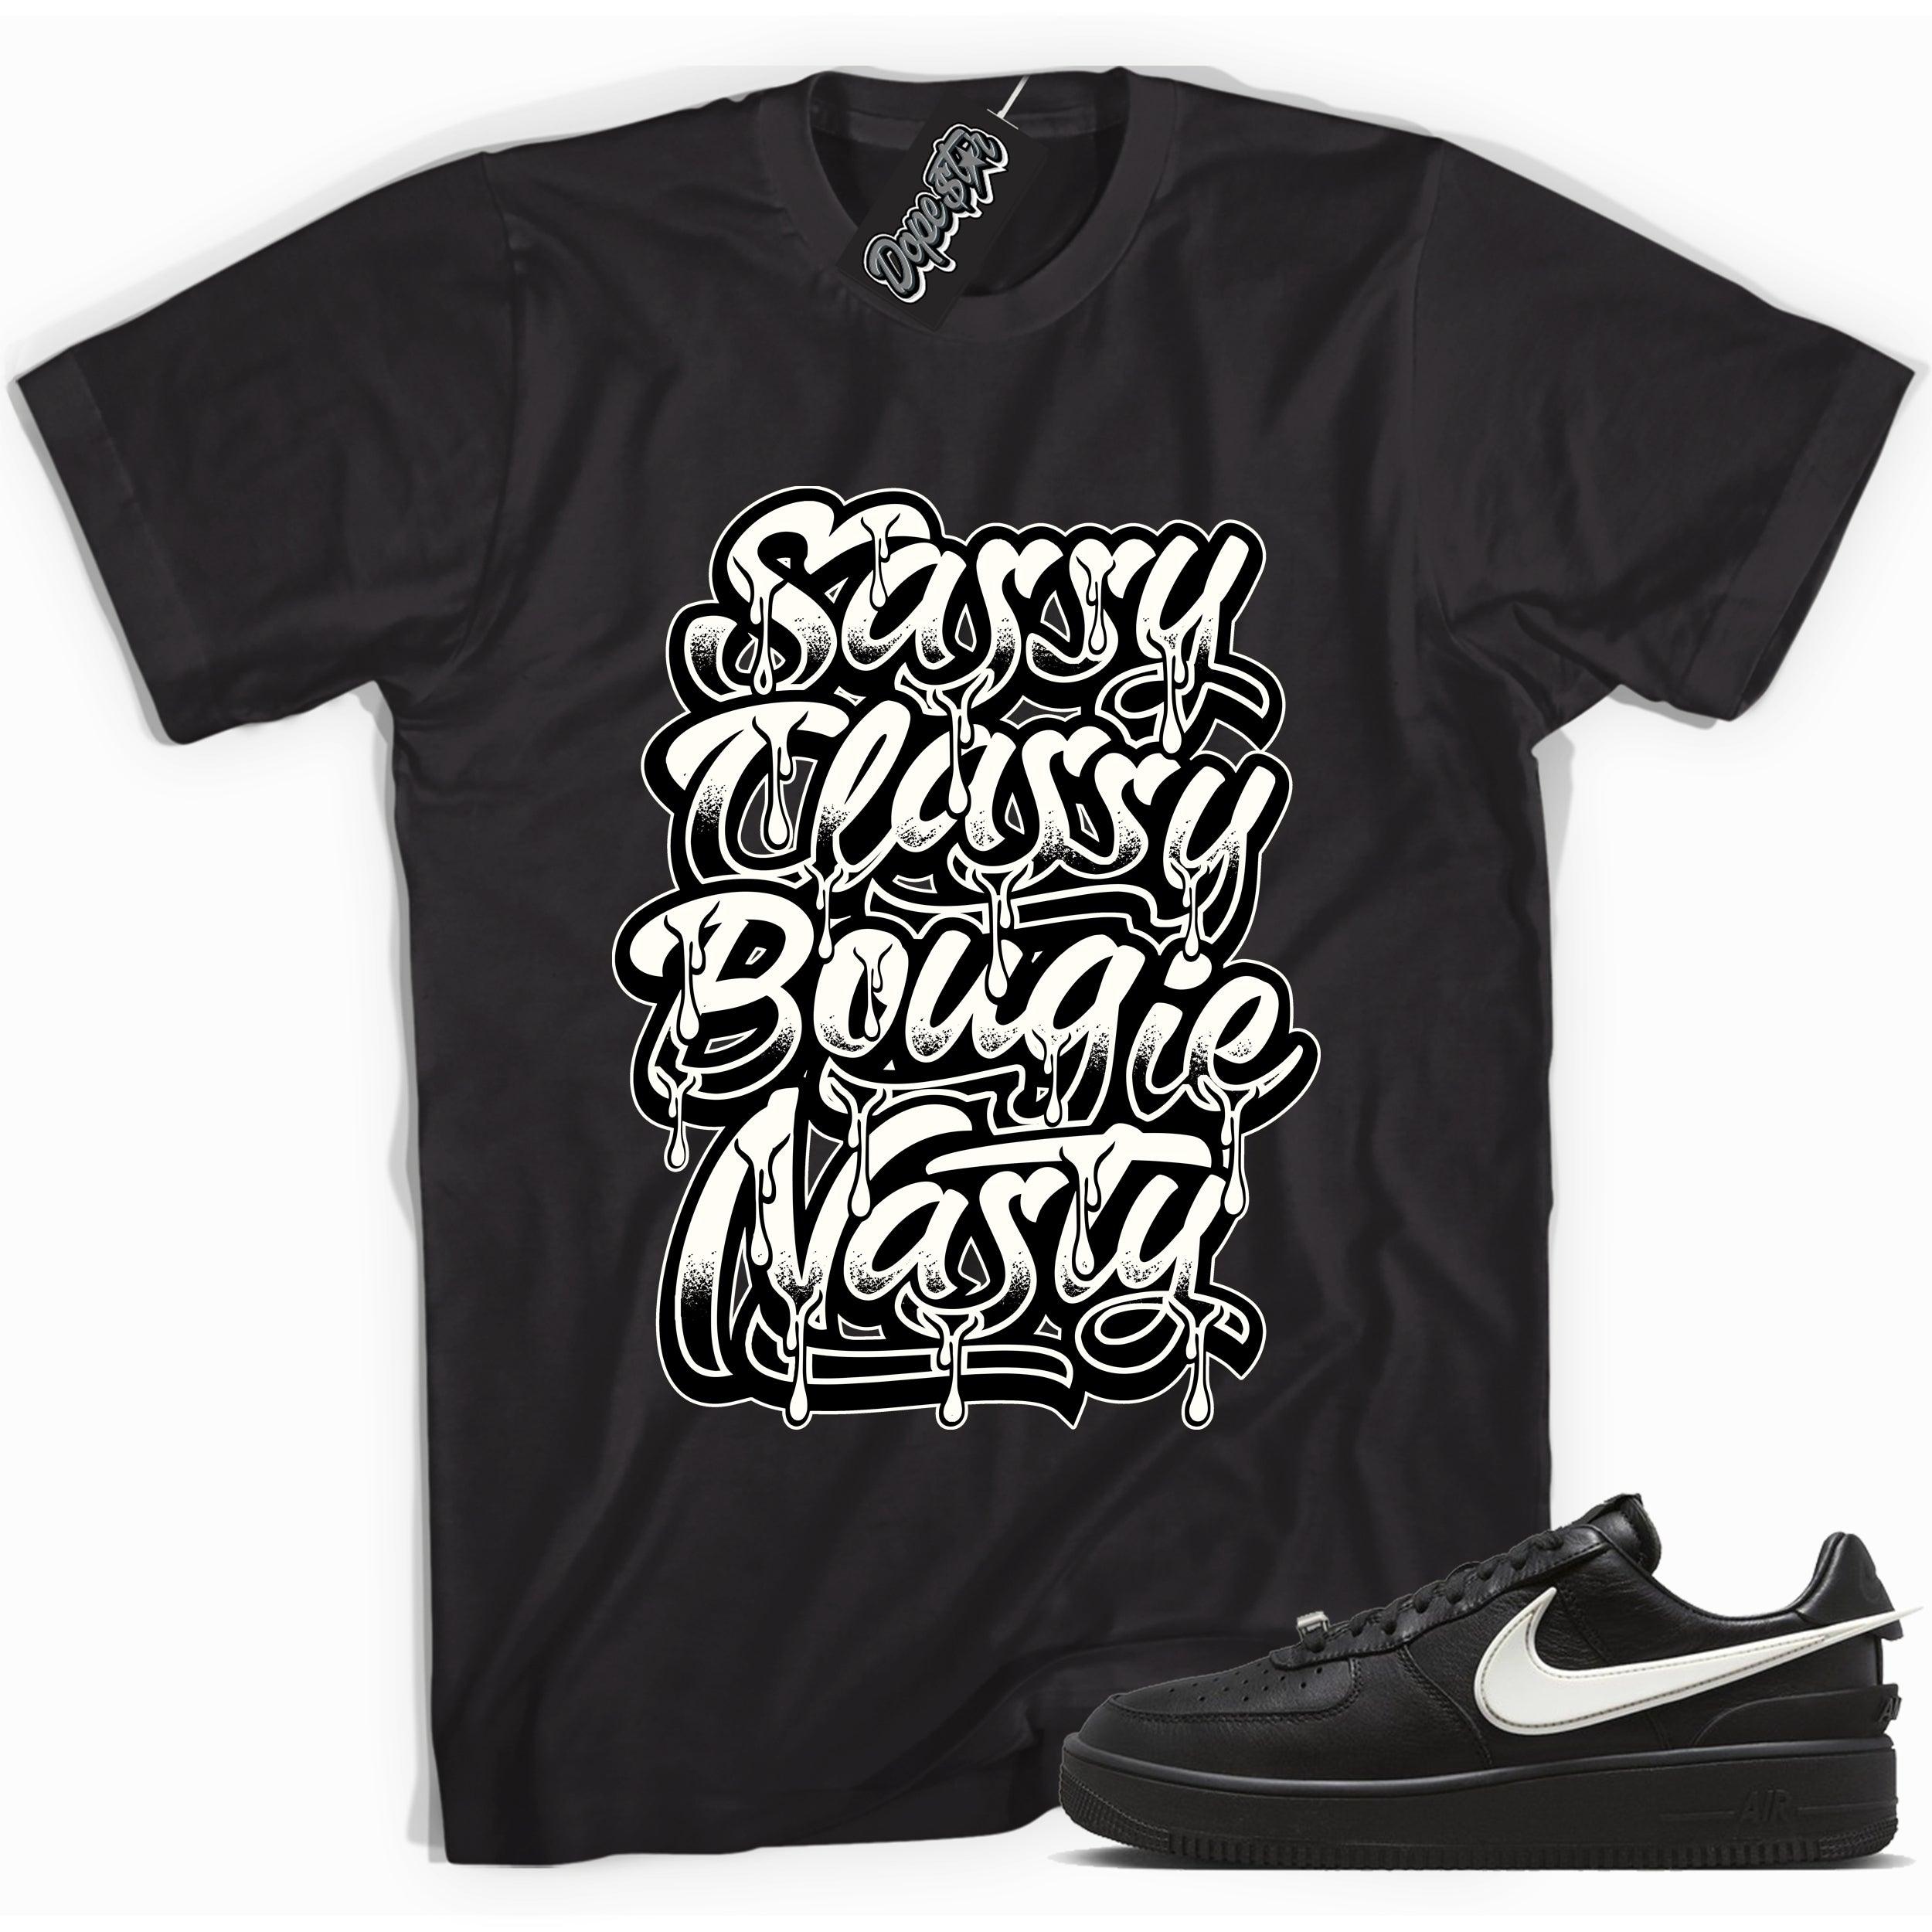 Cool black graphic tee with 'sassy classy' print, that perfectly matches Nike Air Force 1 Low Ambush Phantom Black sneakers